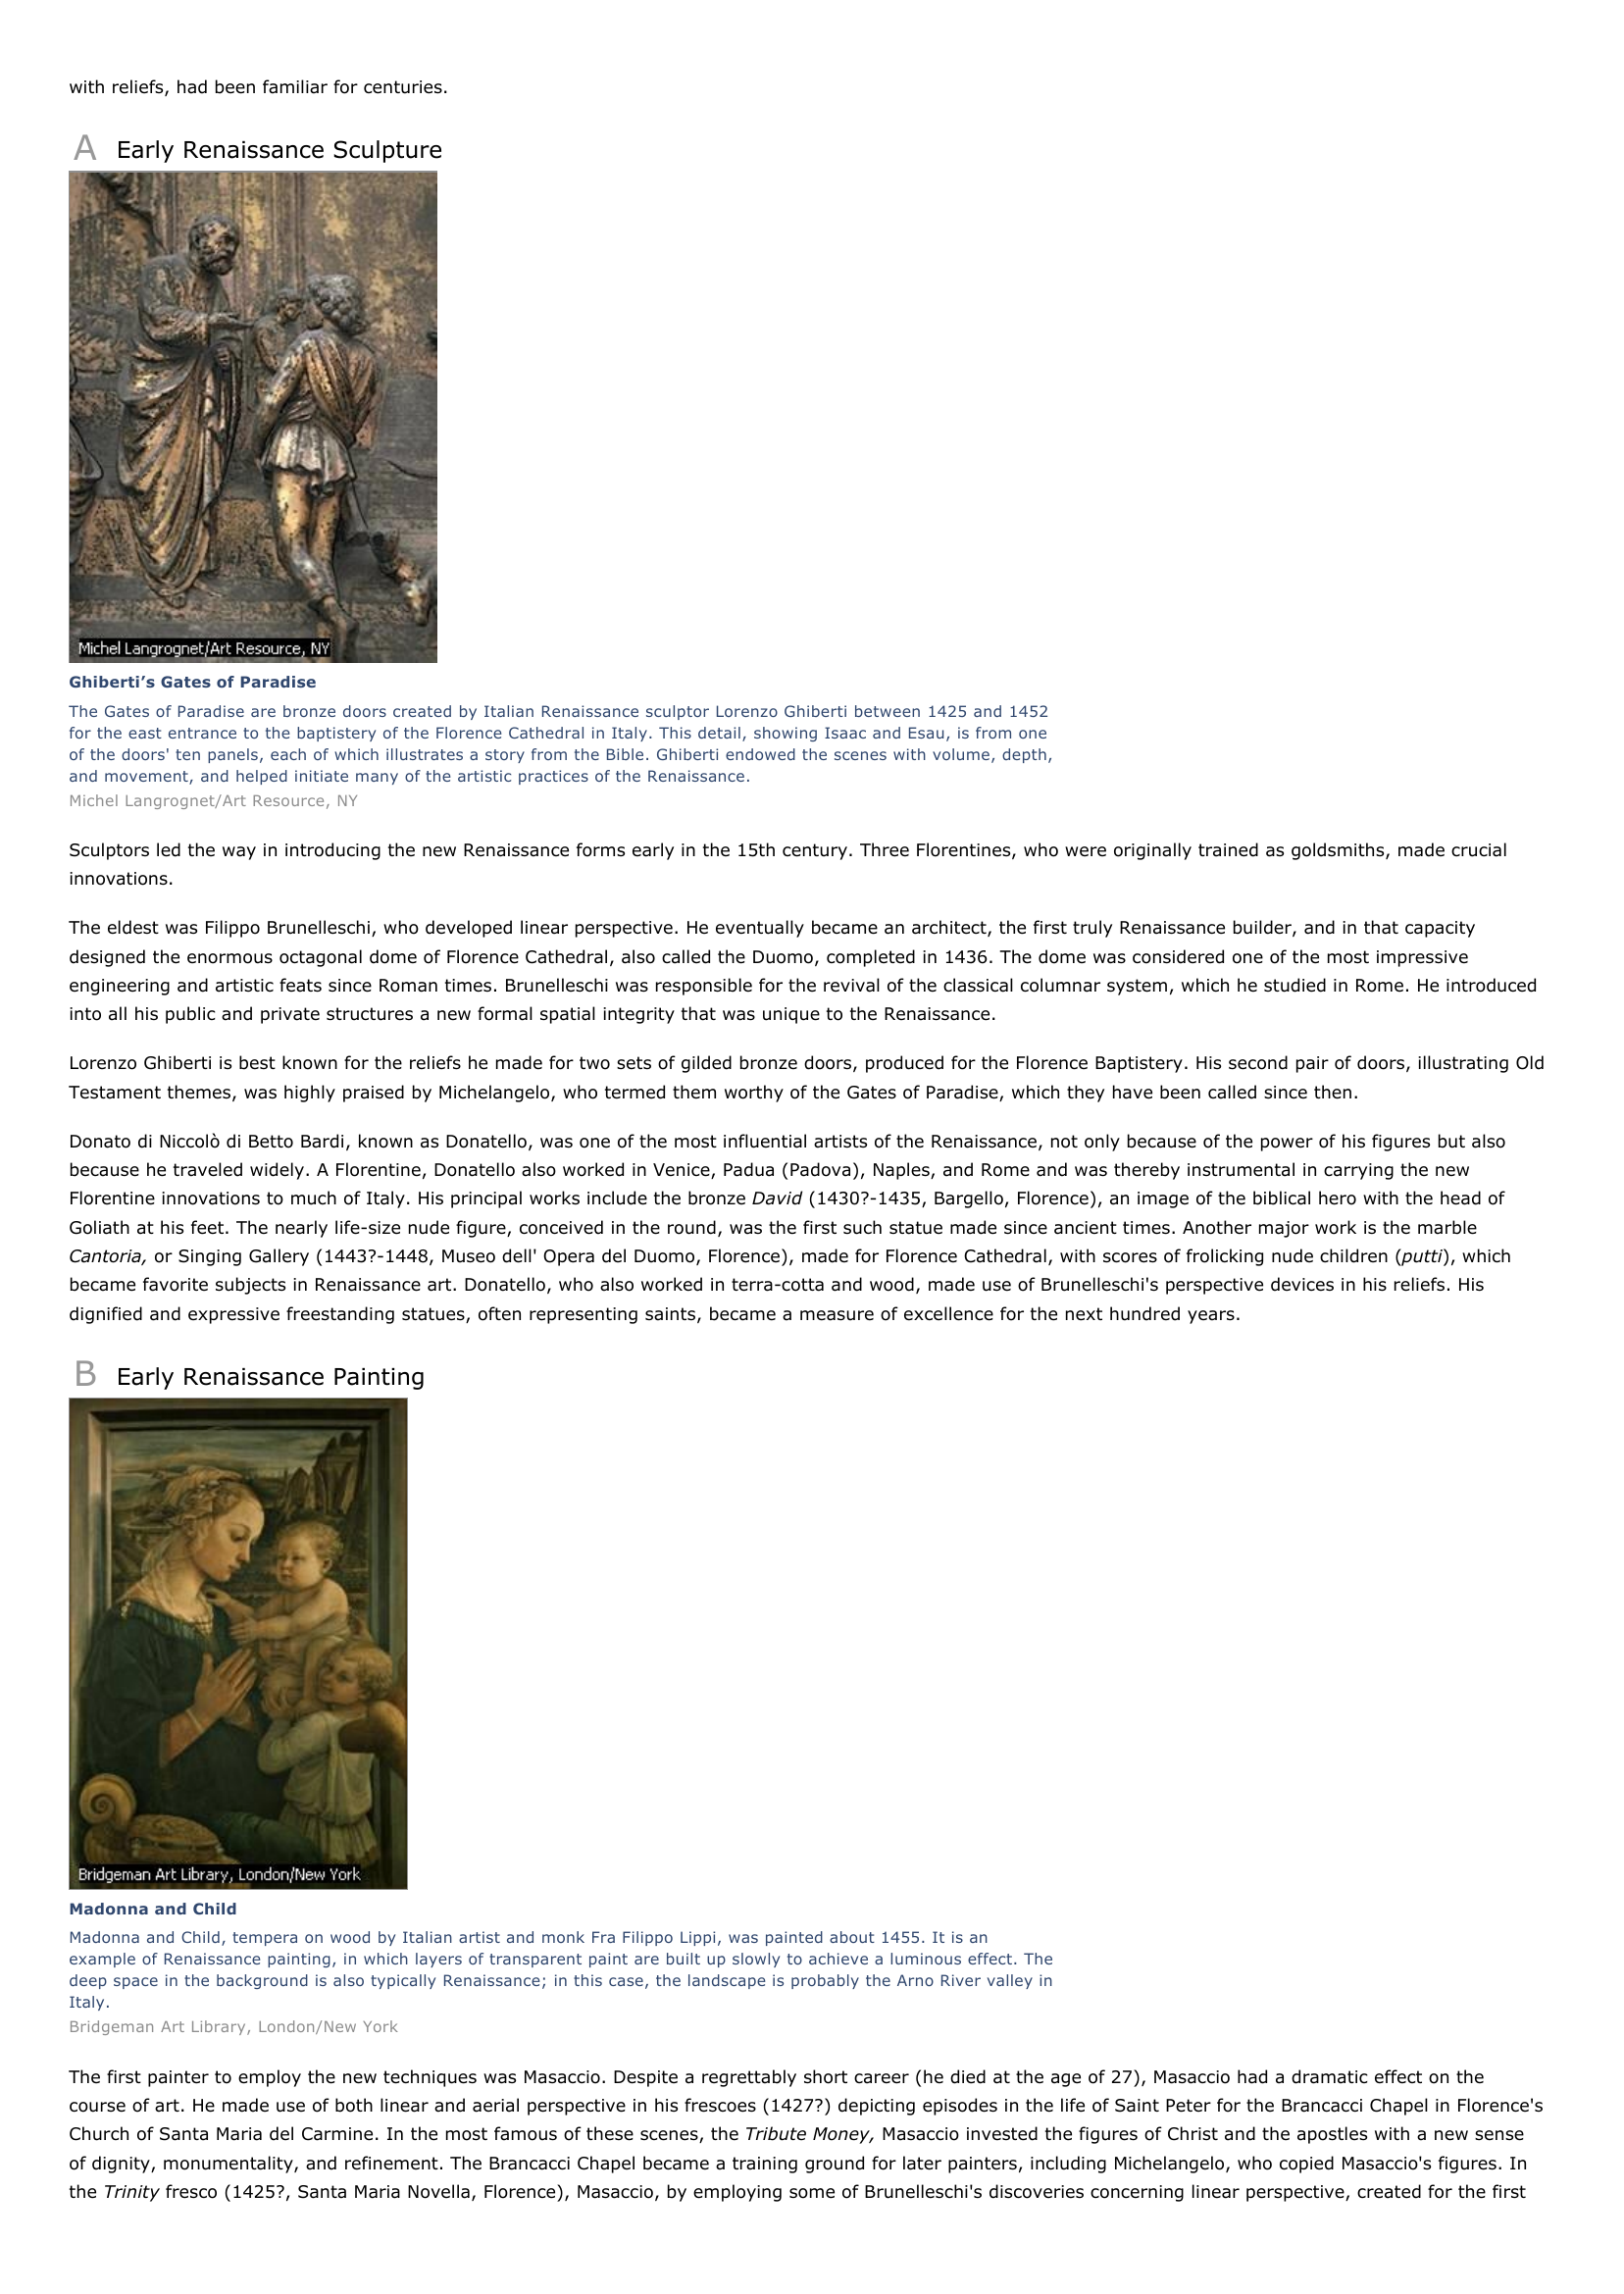 Prévisualisation du document Renaissance Art and Architecture
I

INTRODUCTION

Renaissance Composition
During the Renaissance (15th and 16th centuries) artists discovered new ways to help them create more realistic and
compelling images.